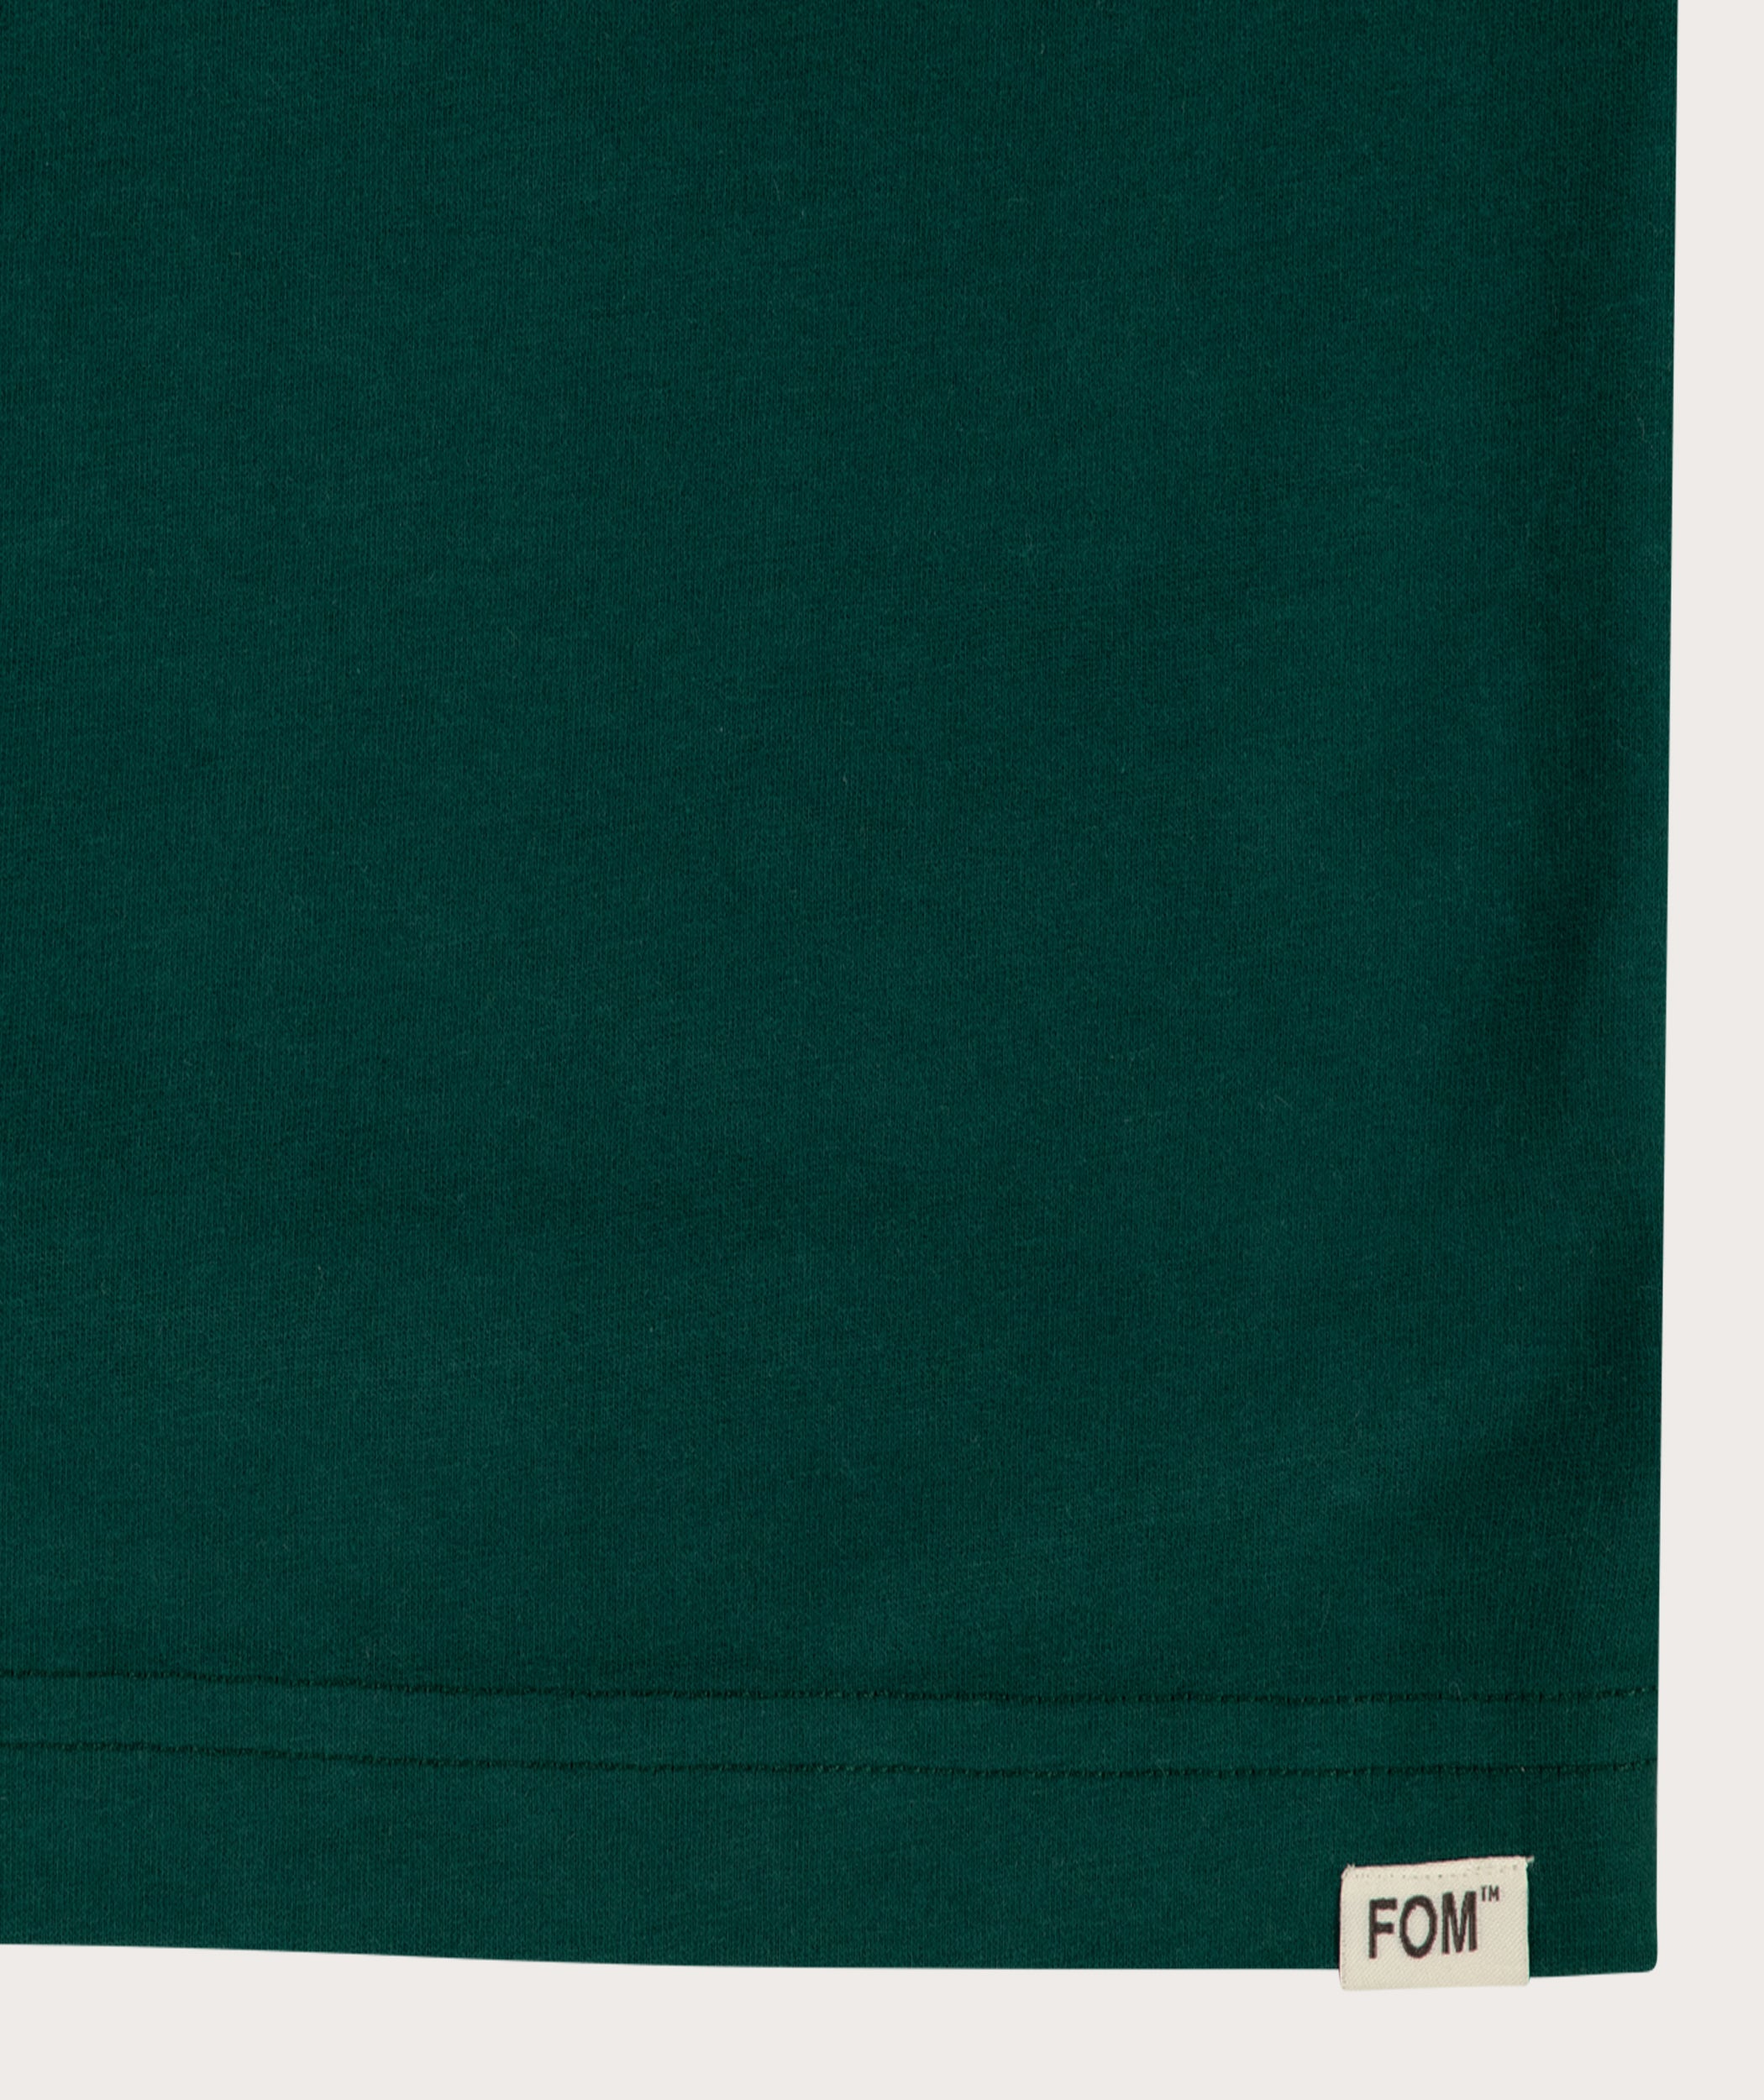 Mens Regular Fit Printed Tee - Forest Green